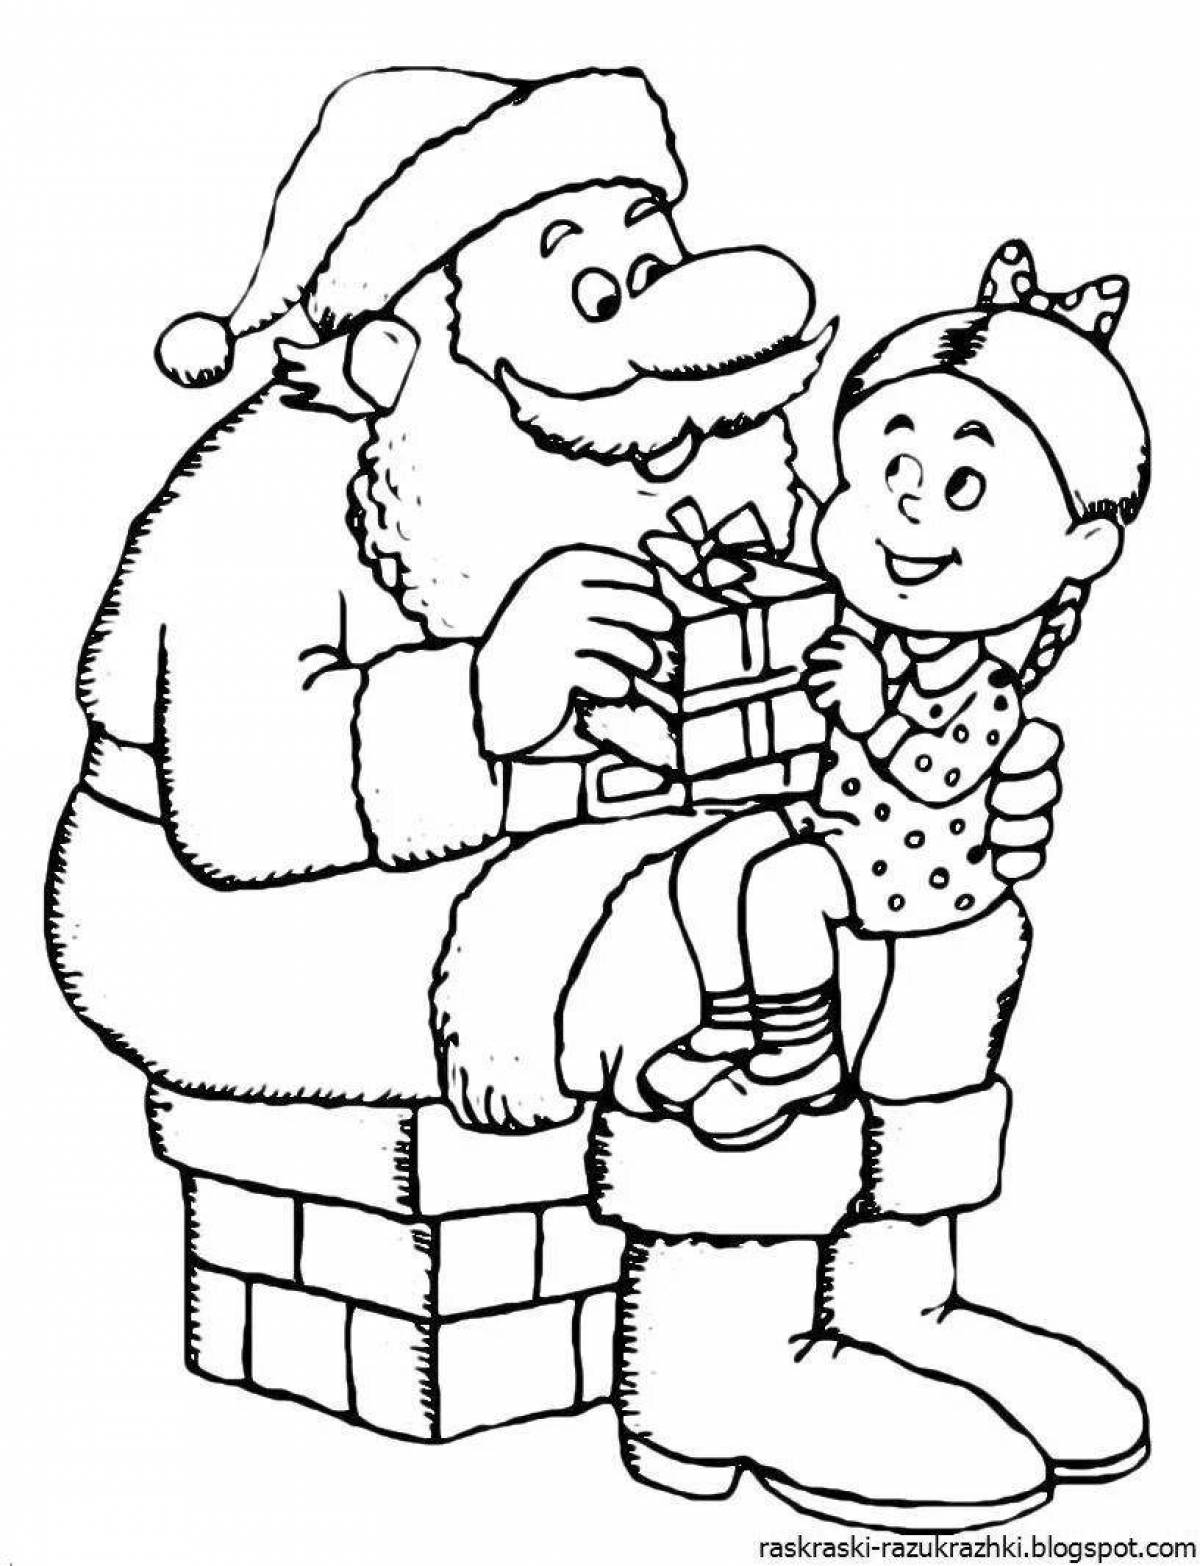 Charming grandfather coloring book